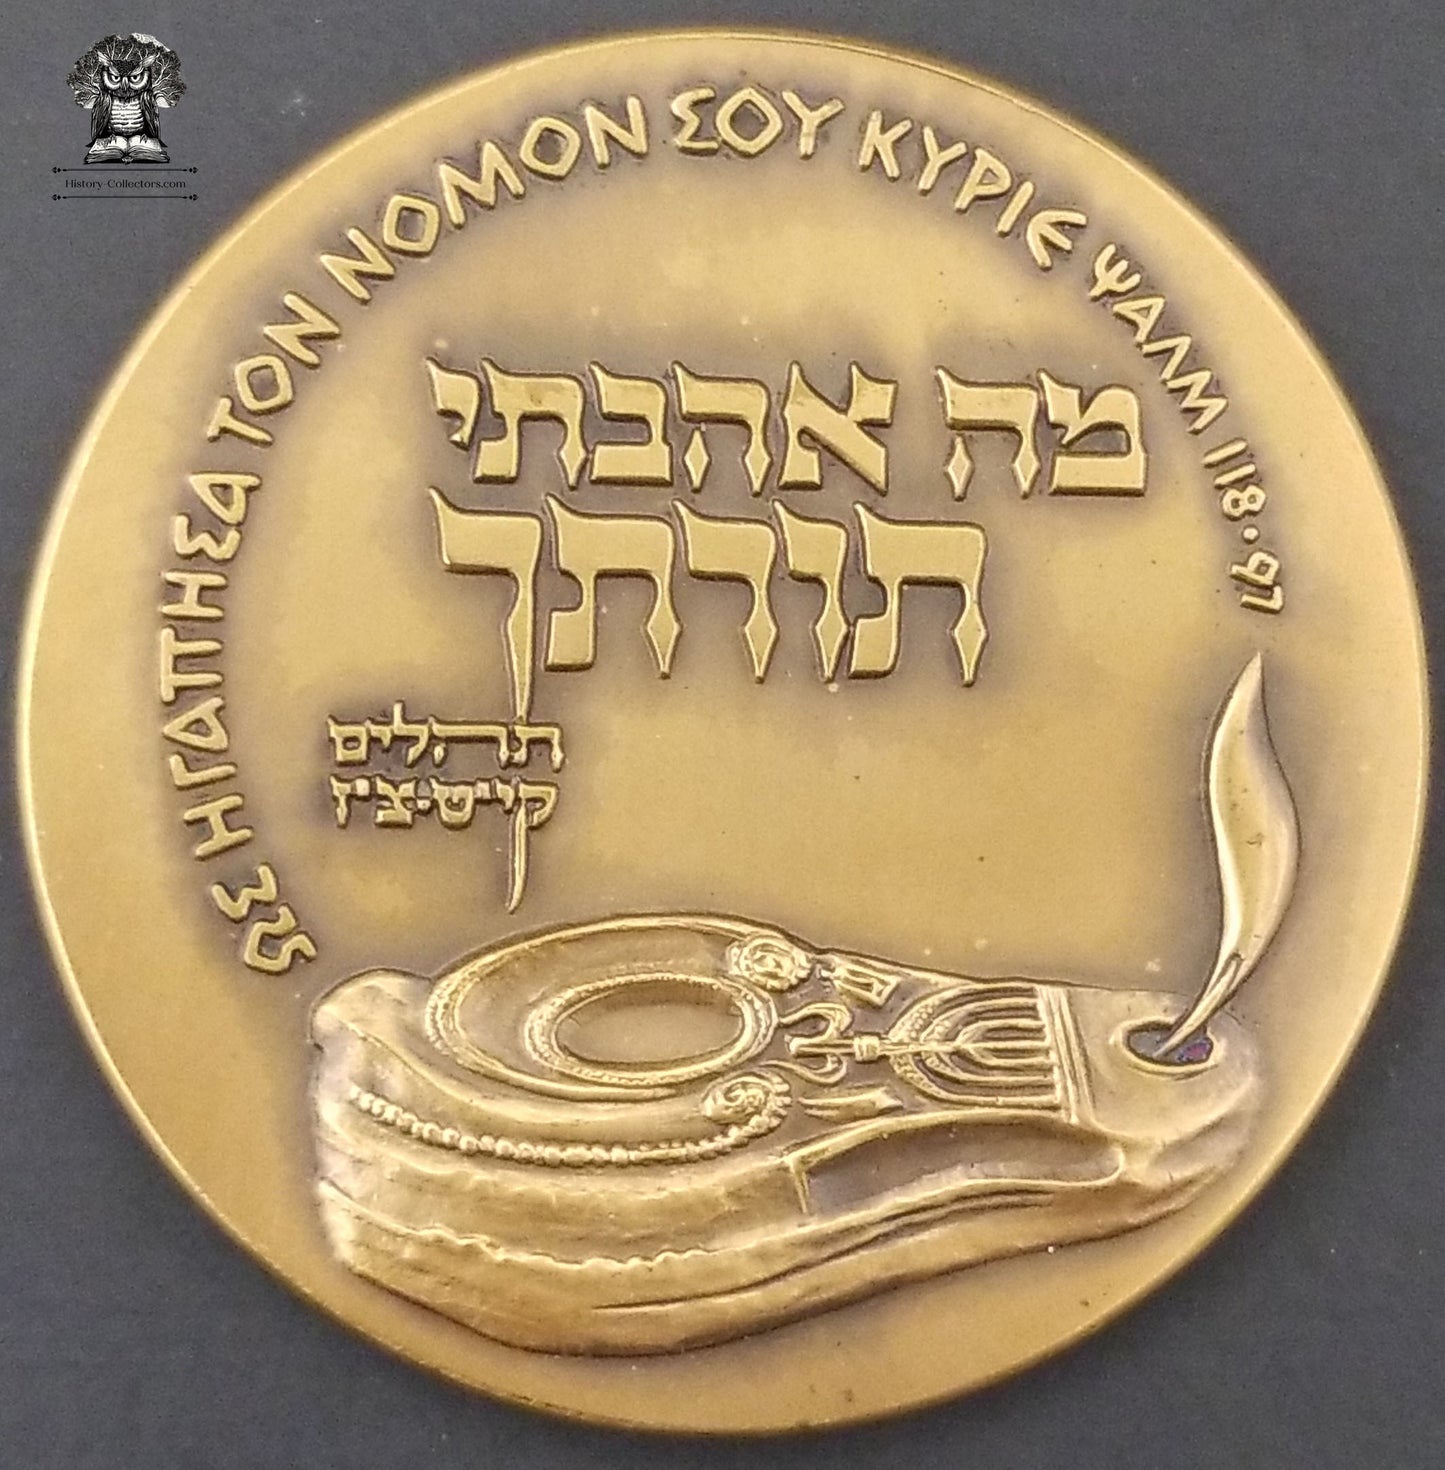 1961 Israel State Medal - Bronze - Second International Bible Contest - Mishnah Talmud